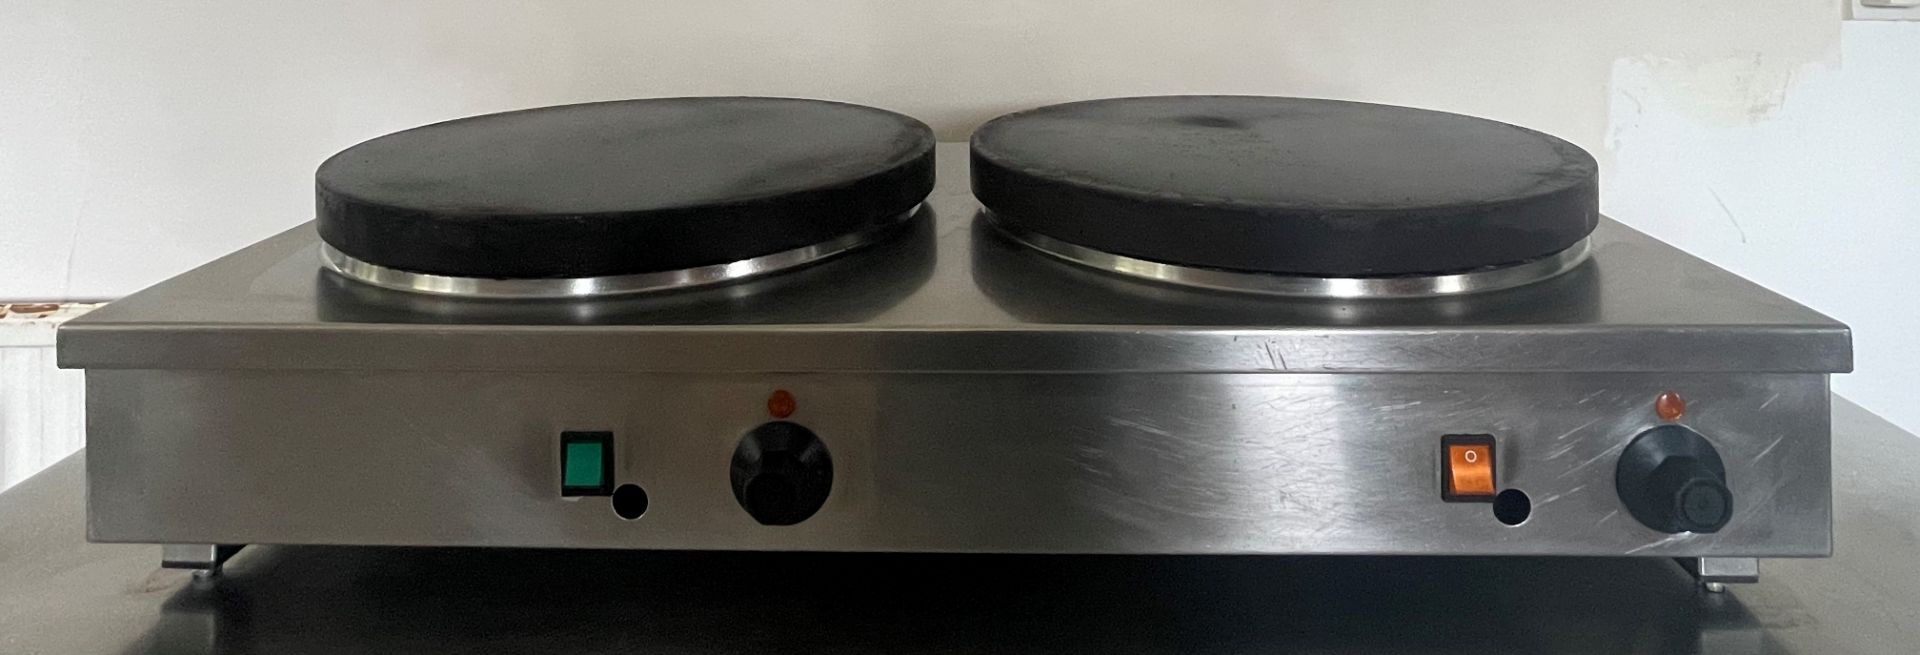 Krampouz Crepe Maker Cast Iron 2 Round Griddle. 2 x 3300W Griddle. 16A. Made in France. 2 x Power